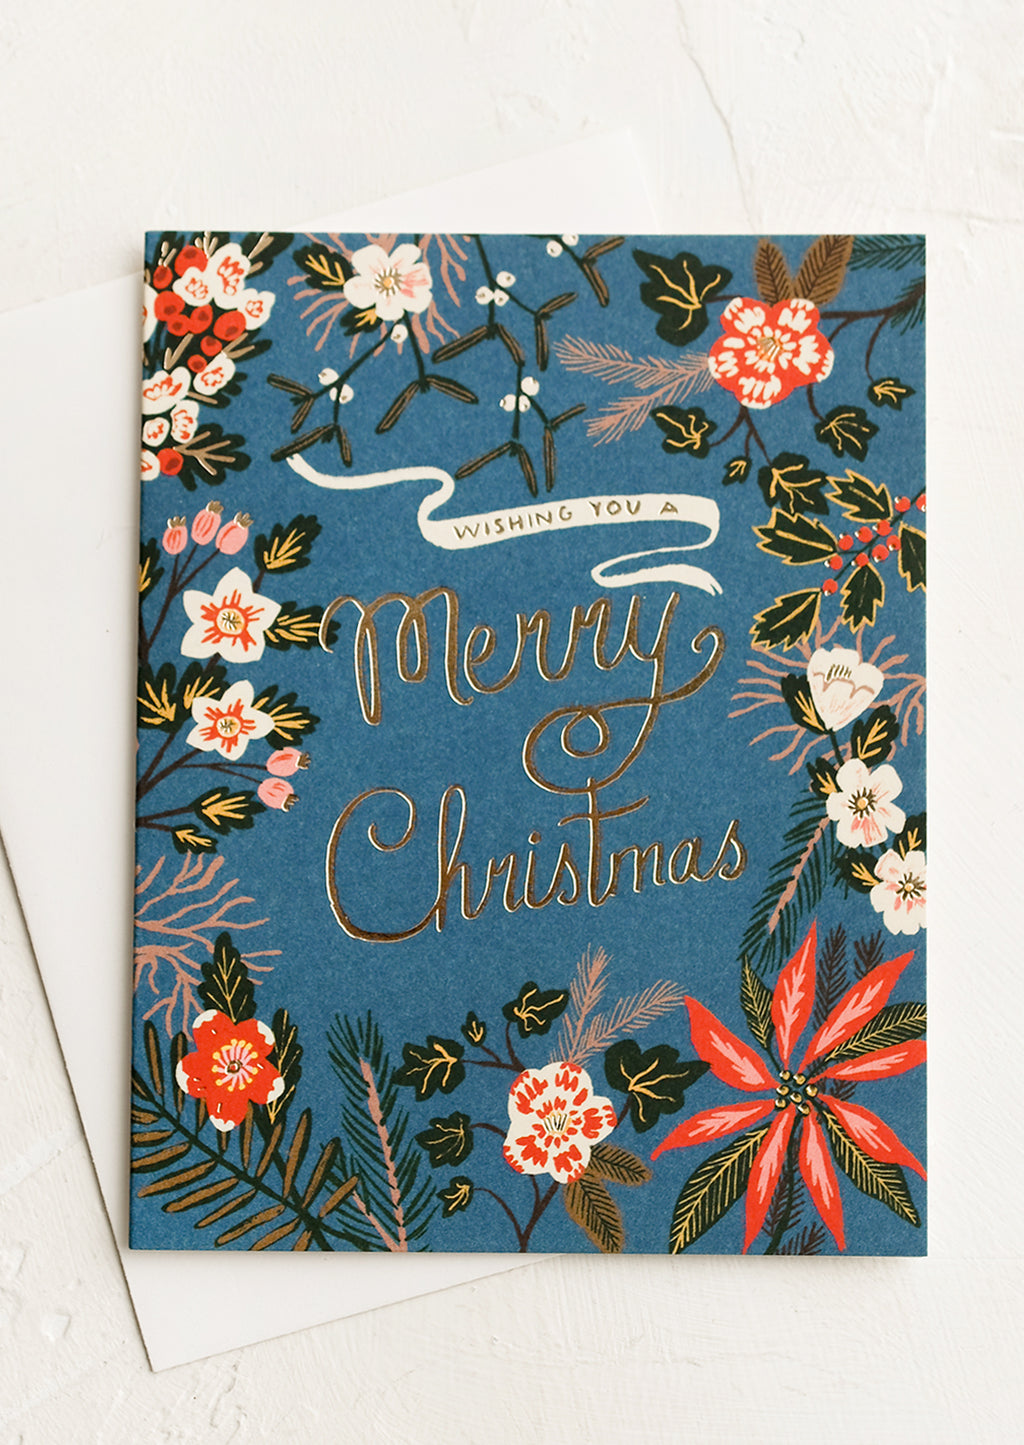 1: A greeting card with poinsettia floral print, gold text reads "Wishing you a merry christmas".